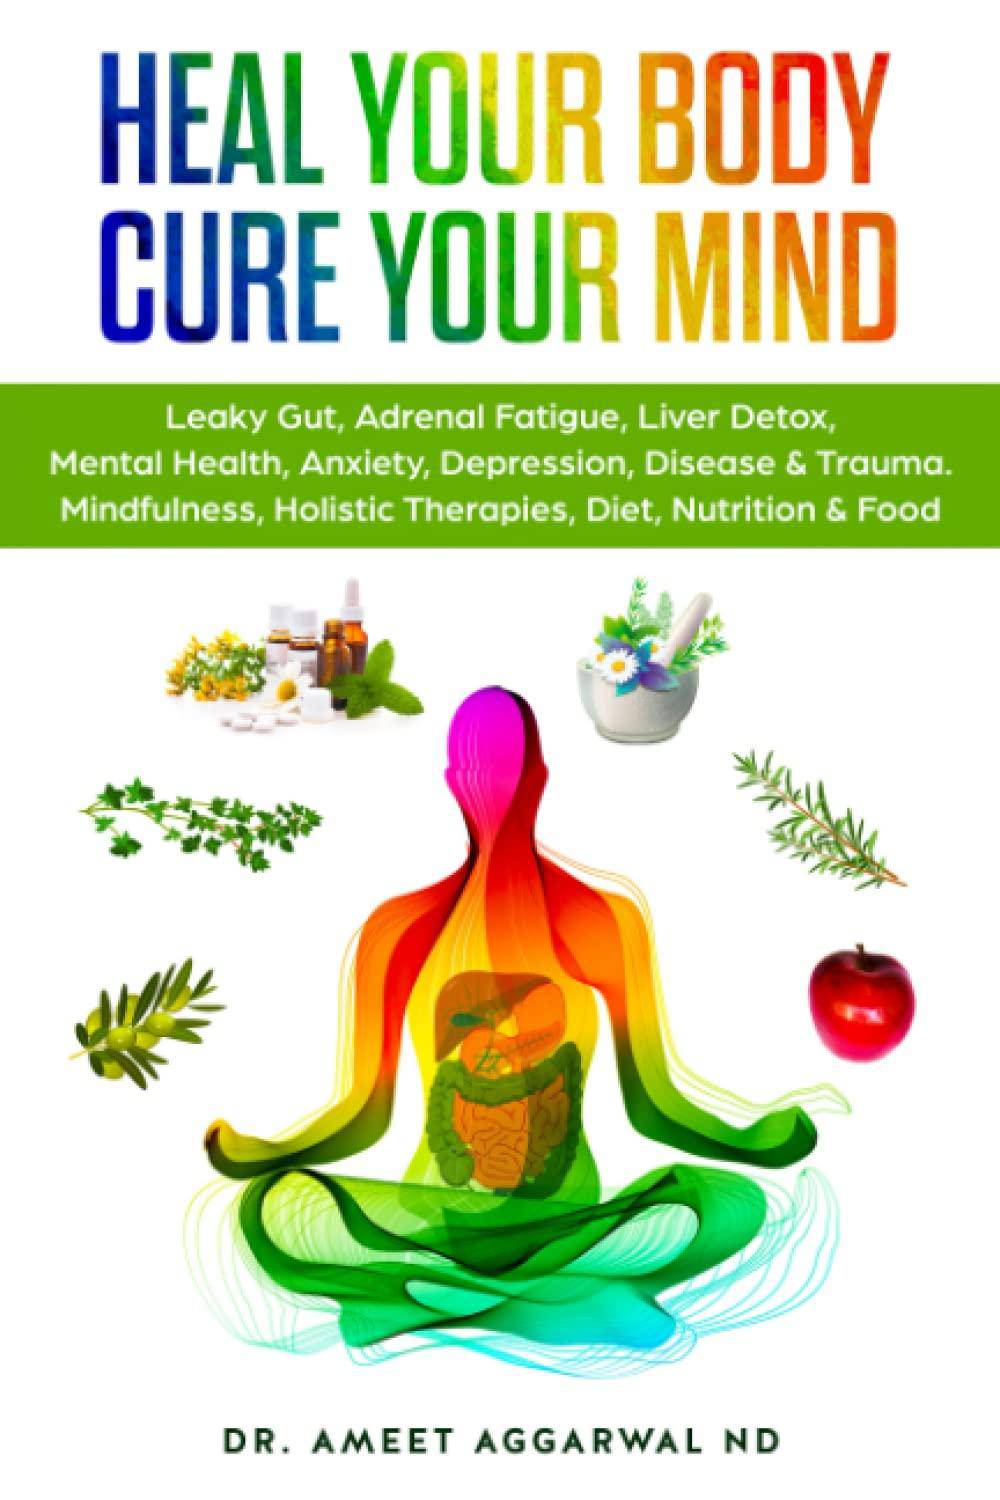 Heal Your Body, Cure Your Mind - SureShot Books Publishing LLC